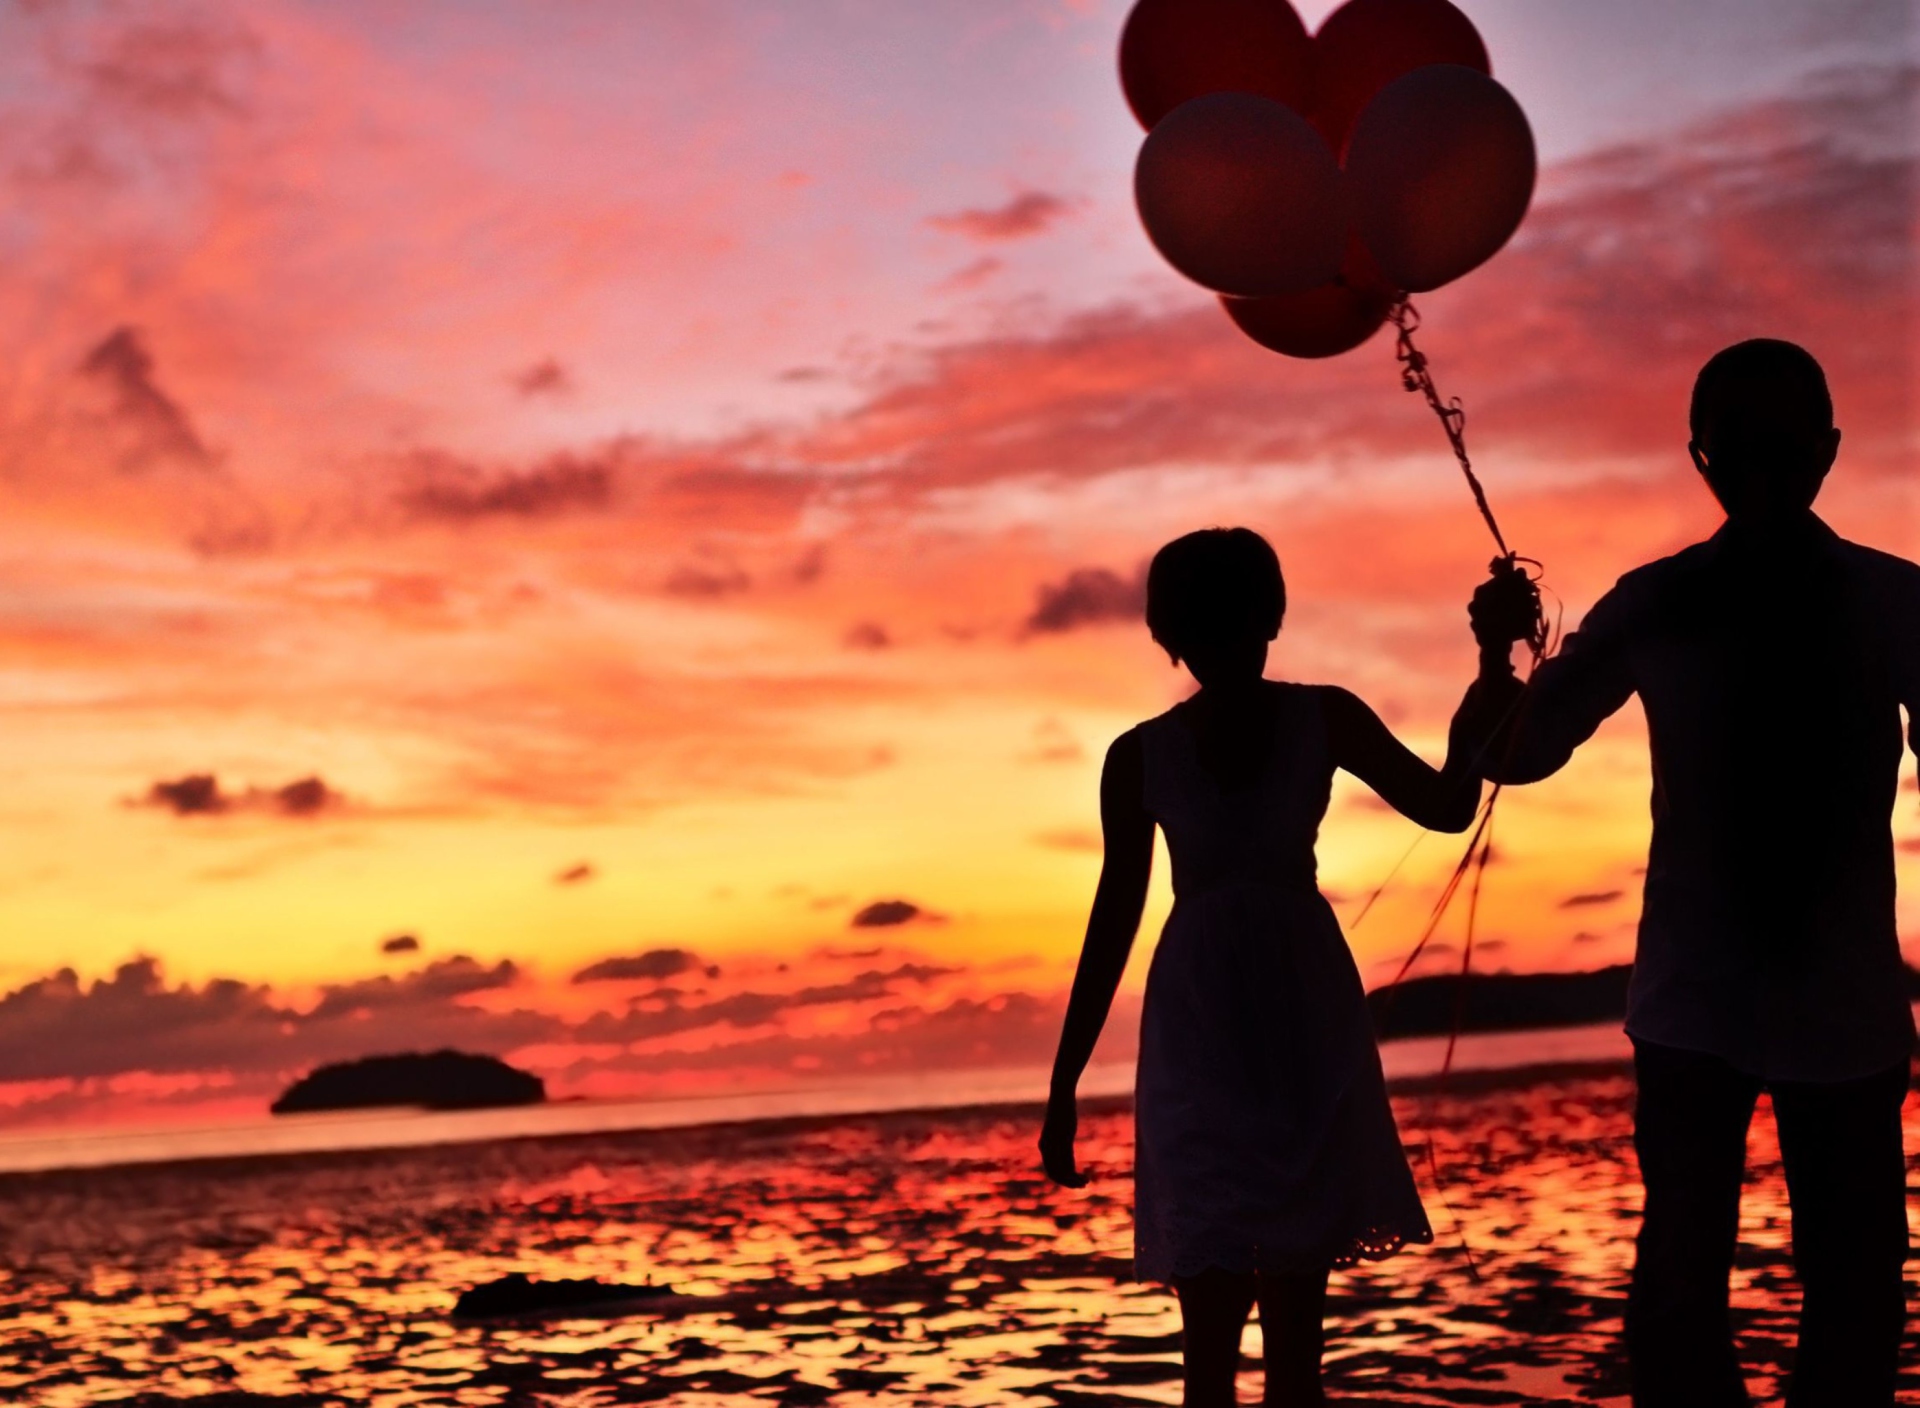 Couple With Balloons Silhouette At Sunset screenshot #1 1920x1408